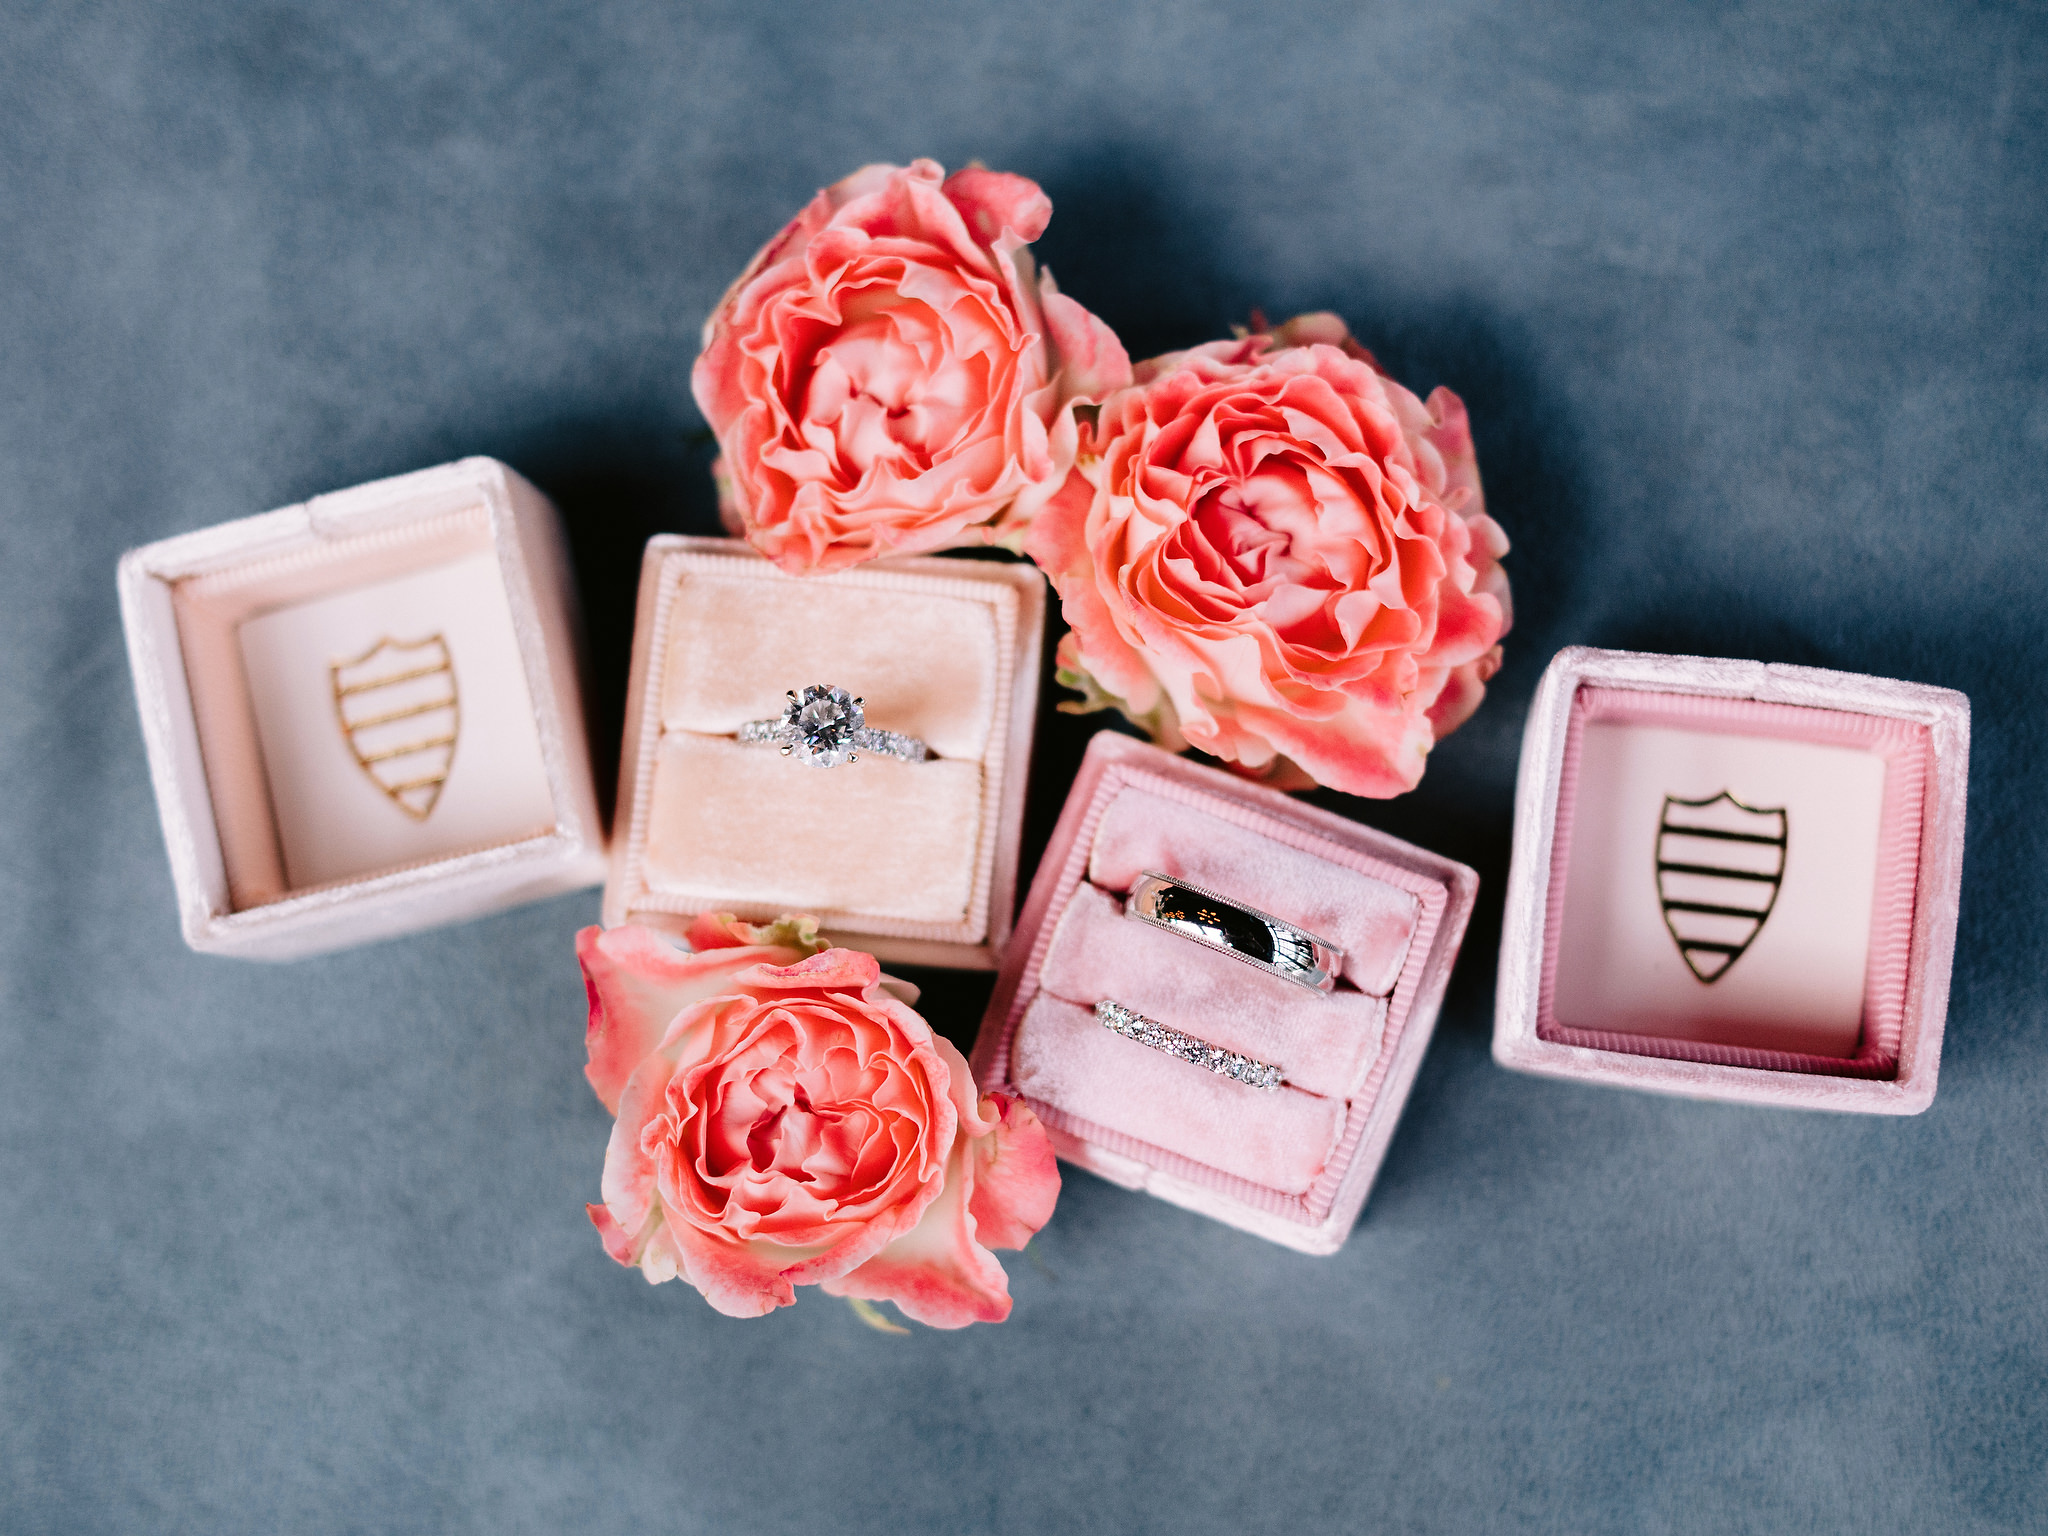 Wedding rings in pink boxes with peach flowers for a Valentine's day wedding. Image by Jenny Fu Studio